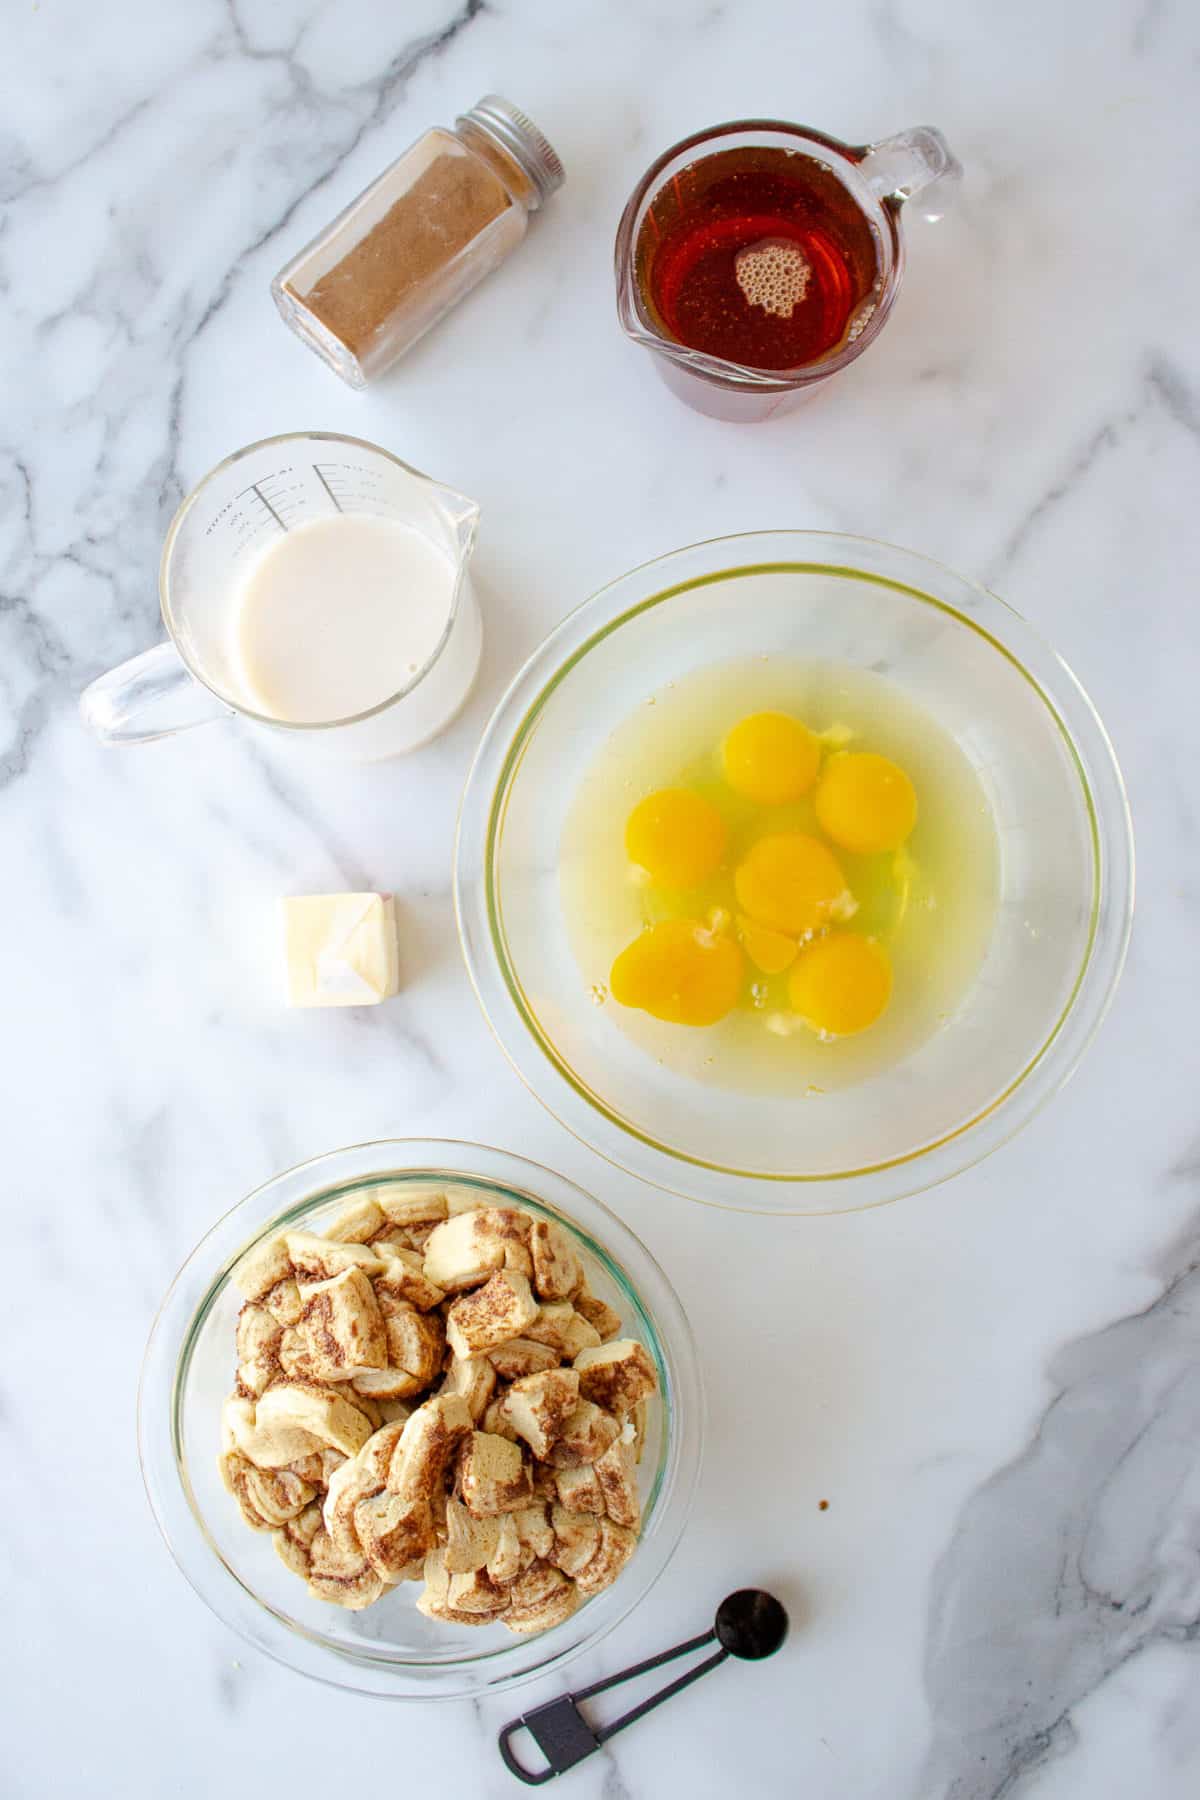 ingredients to make cinnamon roll french toast cassserole